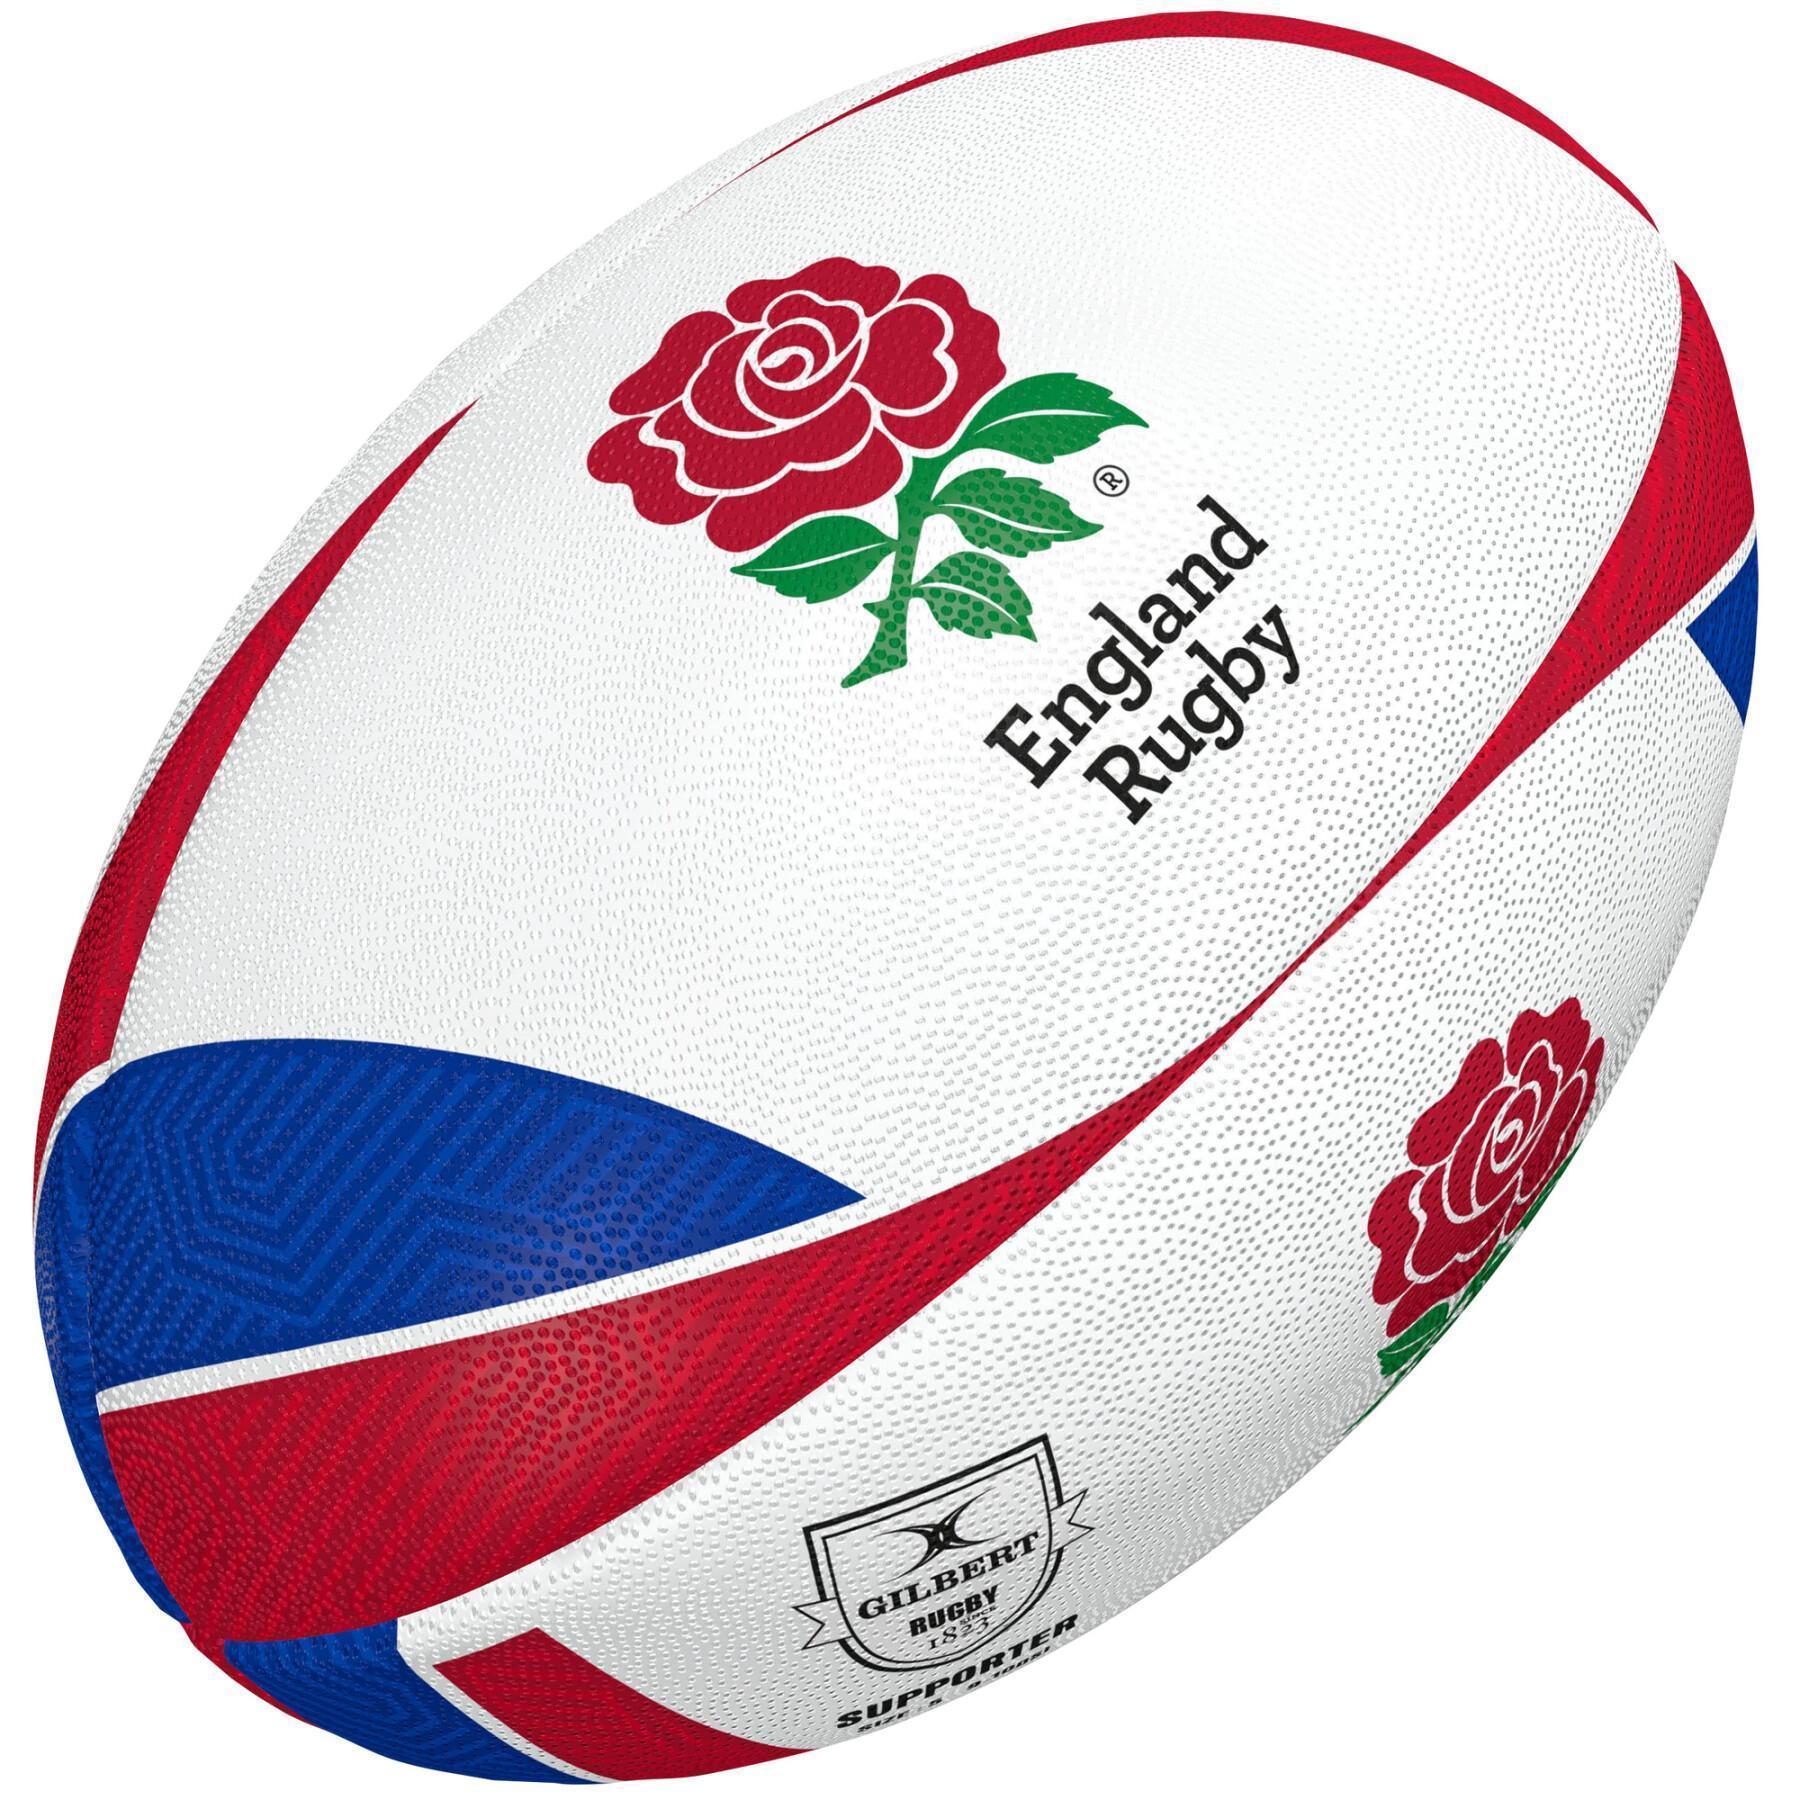 Rugbyball Angleterre 2021/22